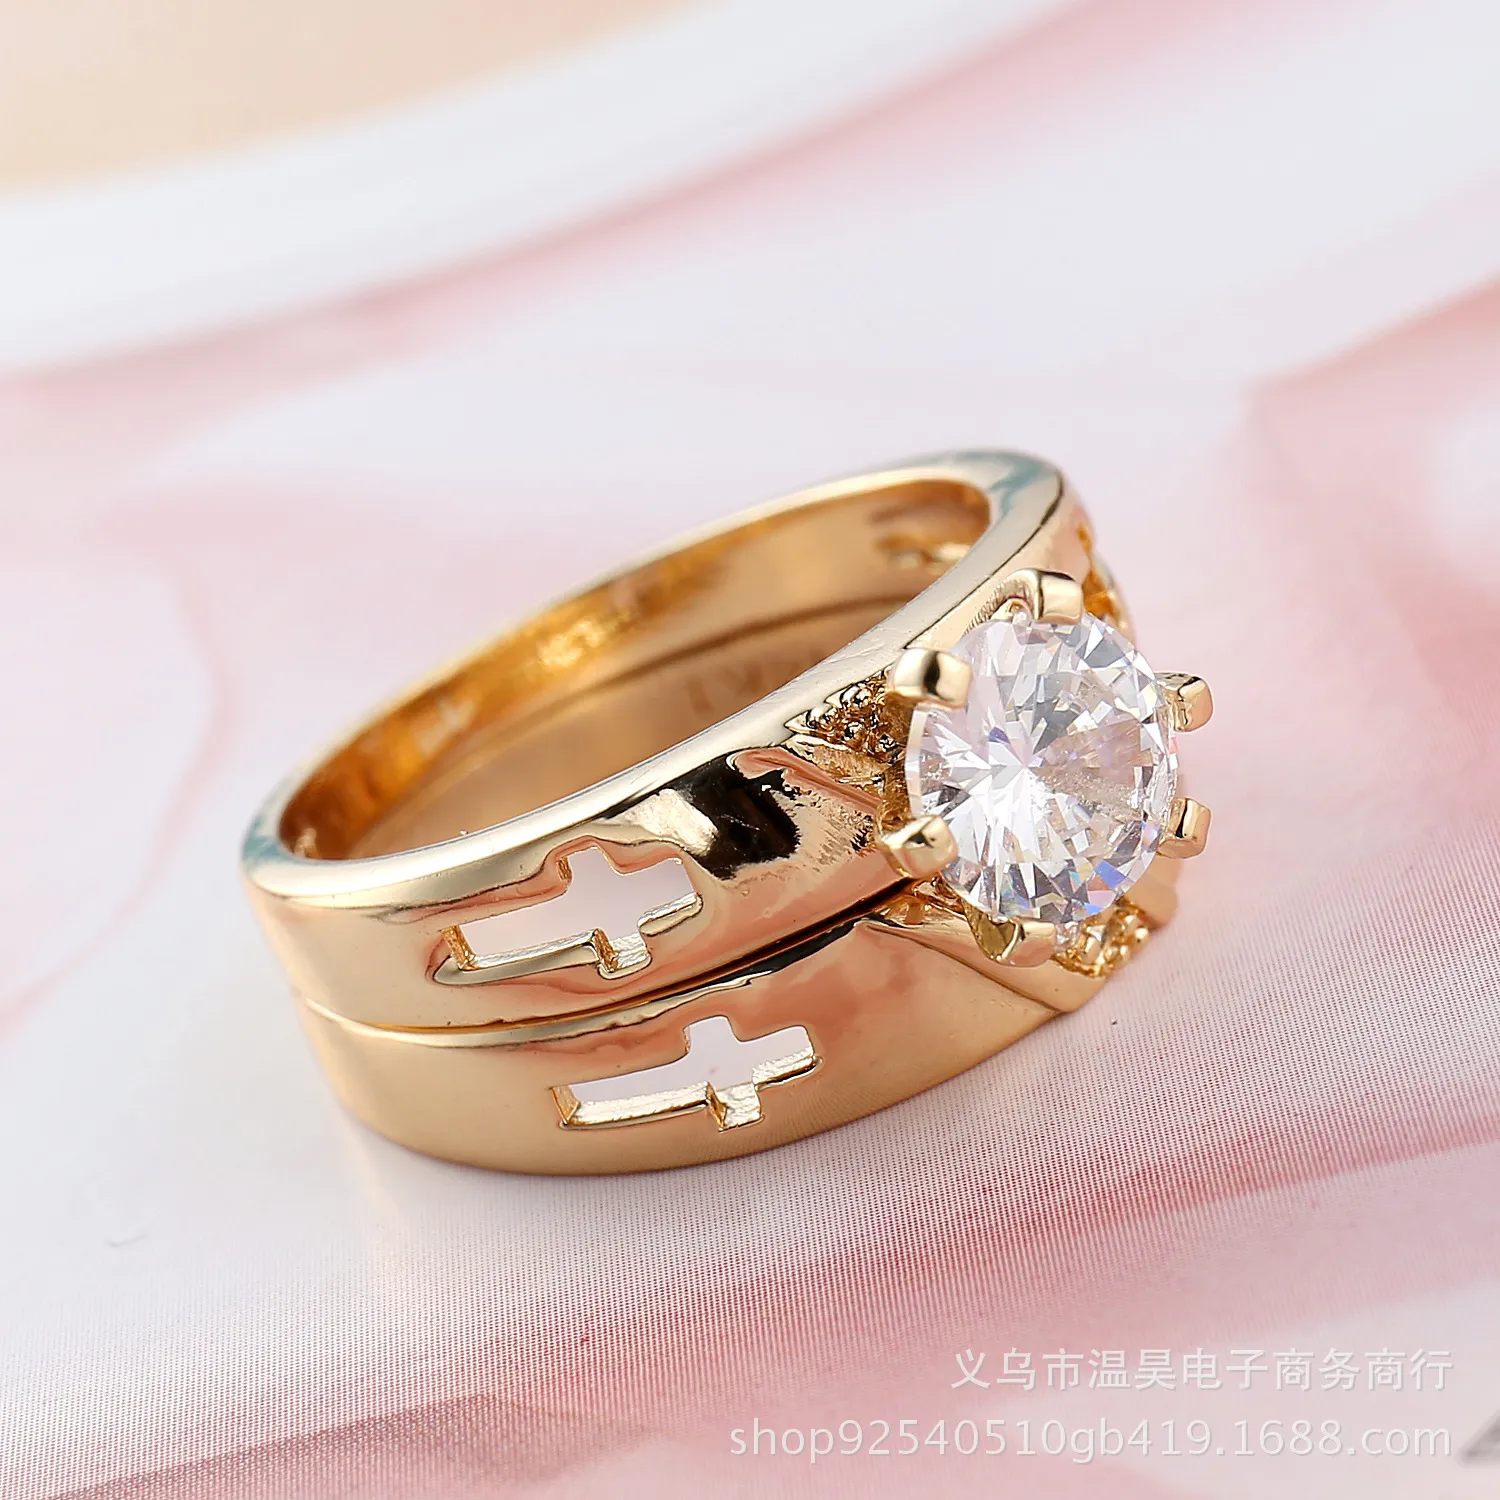 2018 new fashion simple and elegant zircon jewelry couple ring engagement party jewelry wedding ring retail whole261k